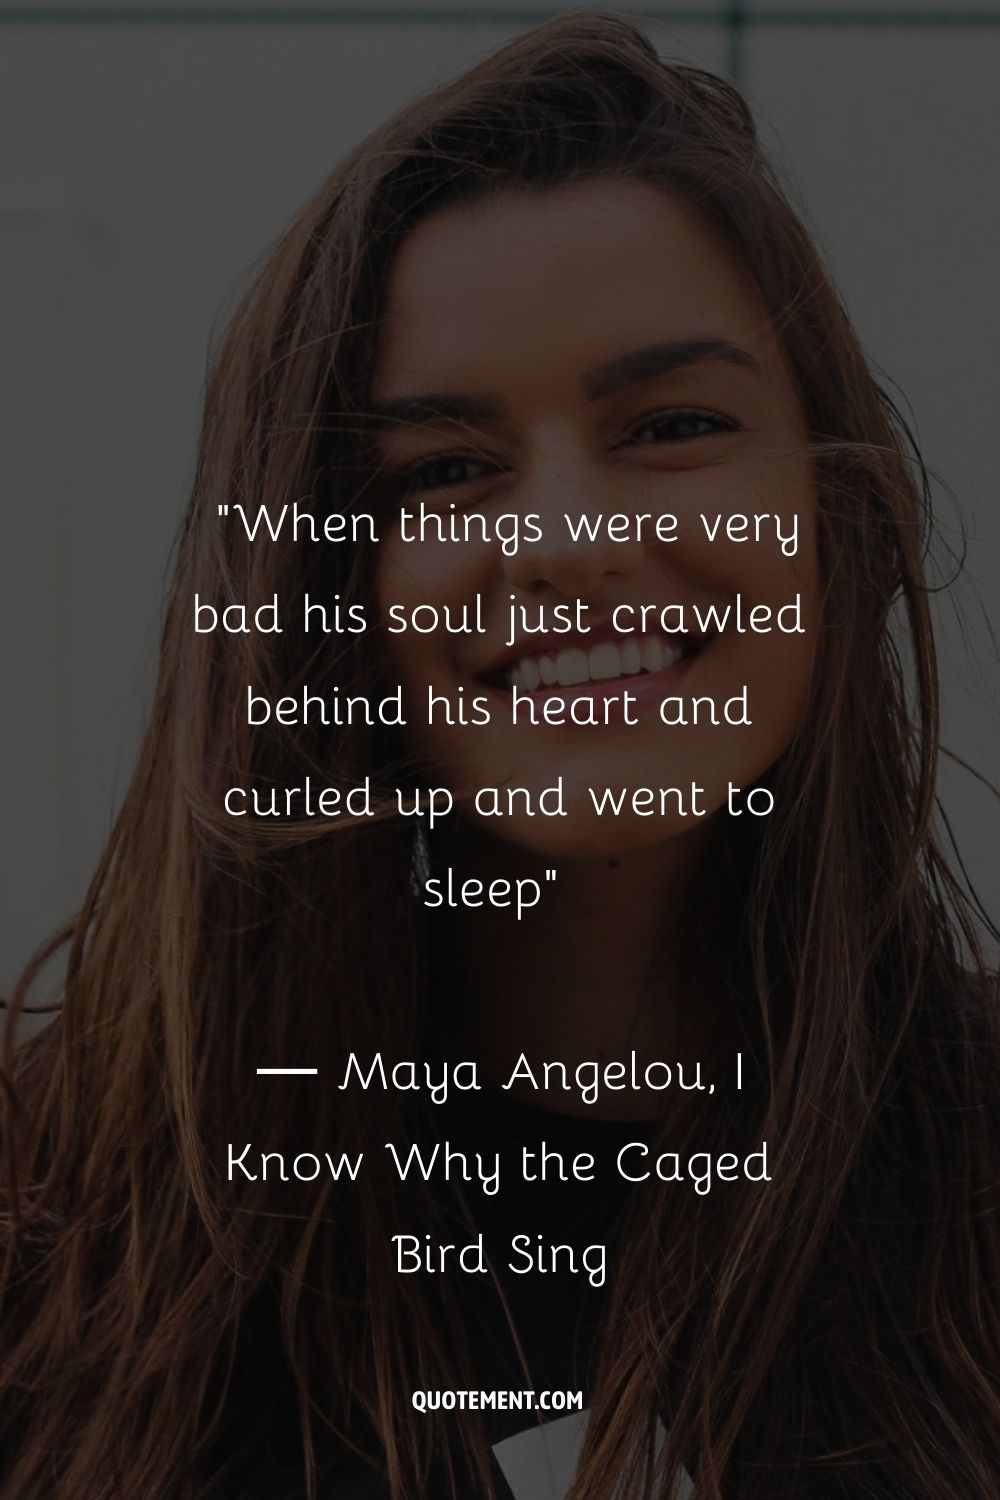 When things were very bad his soul just crawled behind his heart and curled up and went to sleep